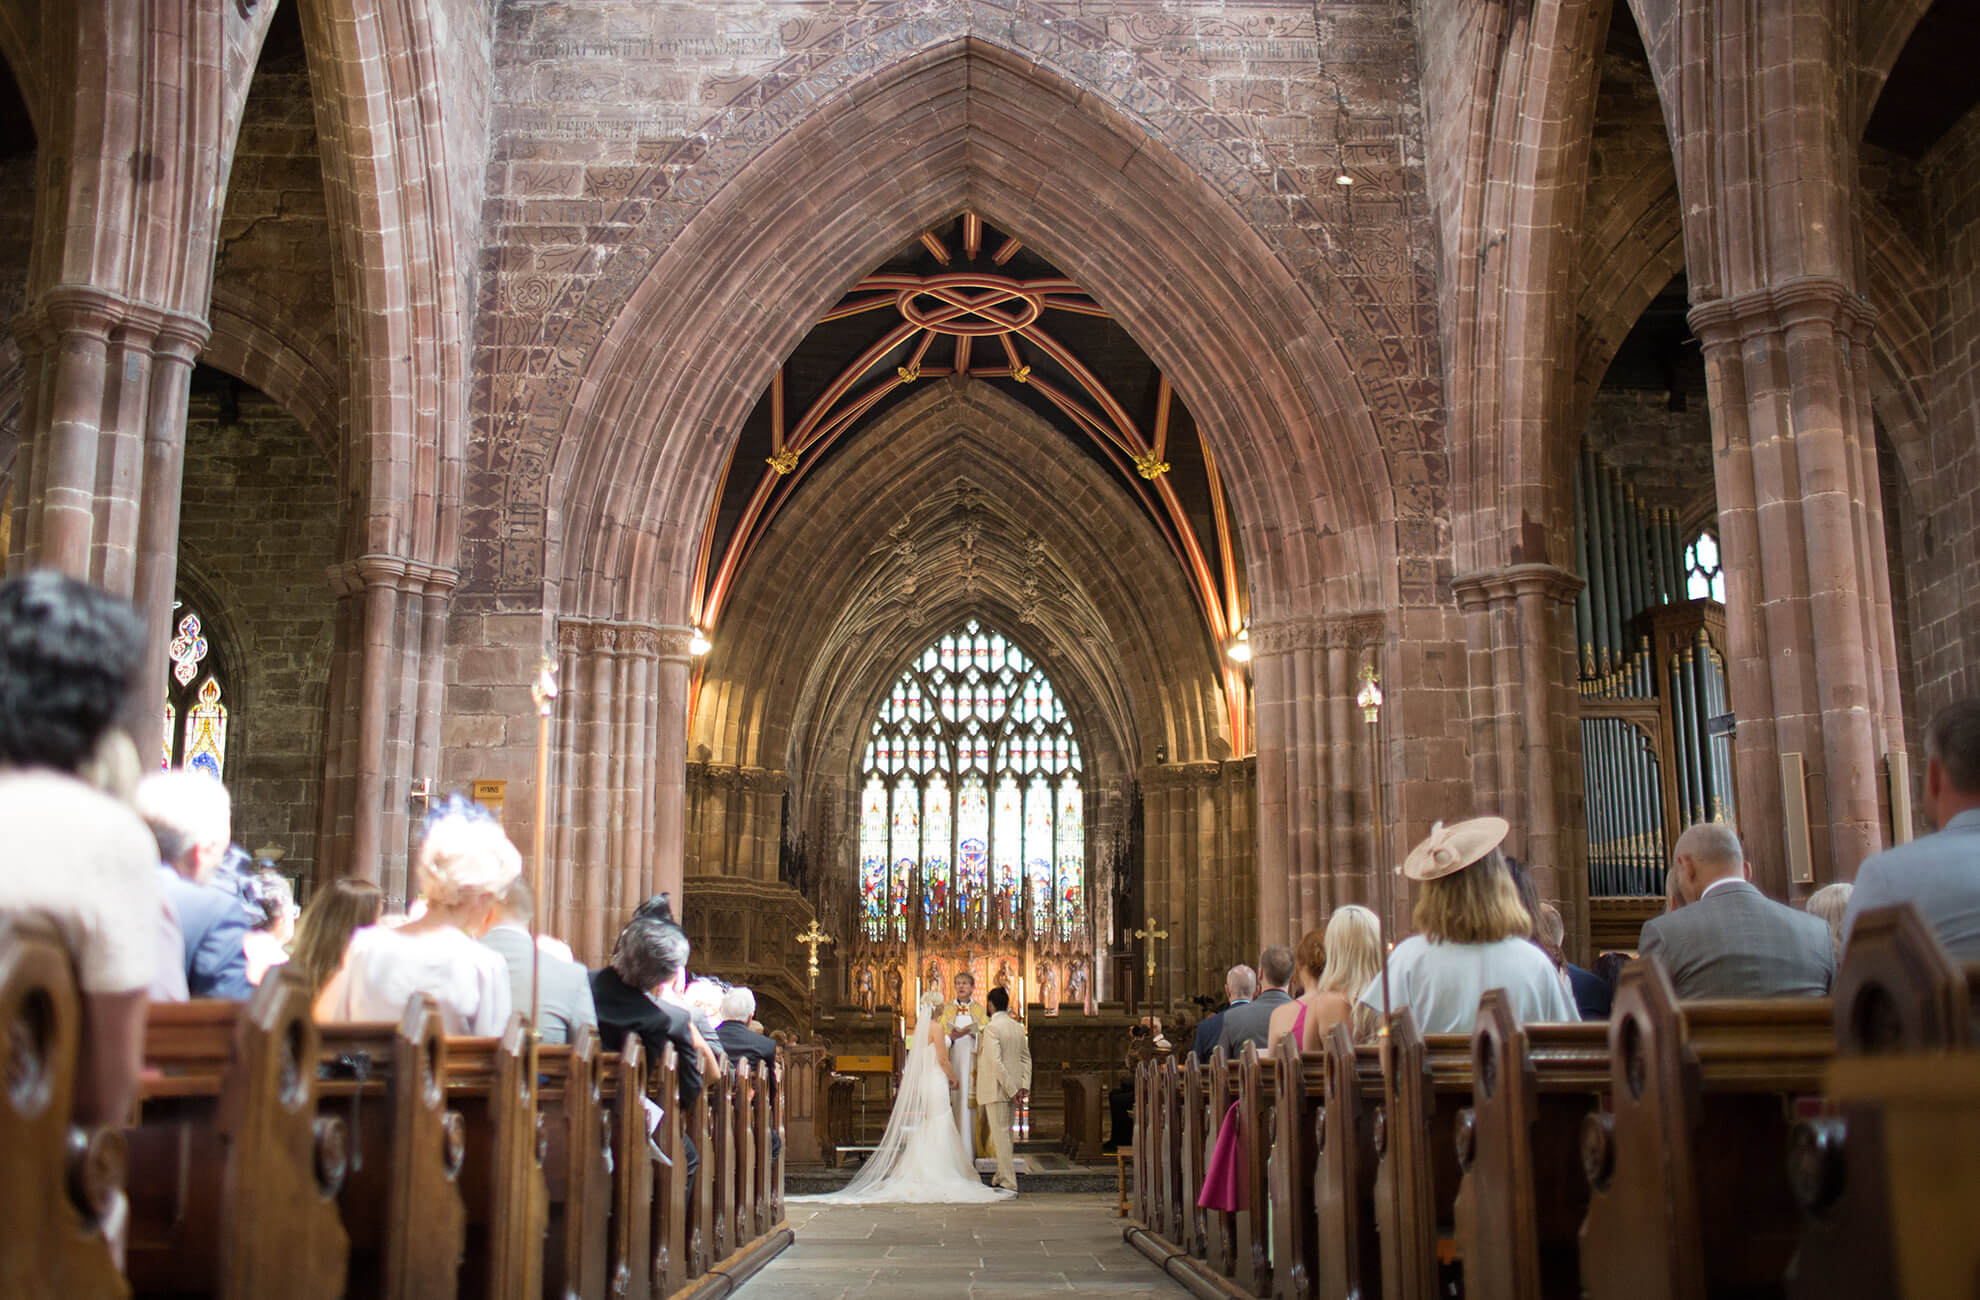 The bride and groom chose a church wedding before heading to Combermere Abbey for their wedding reception